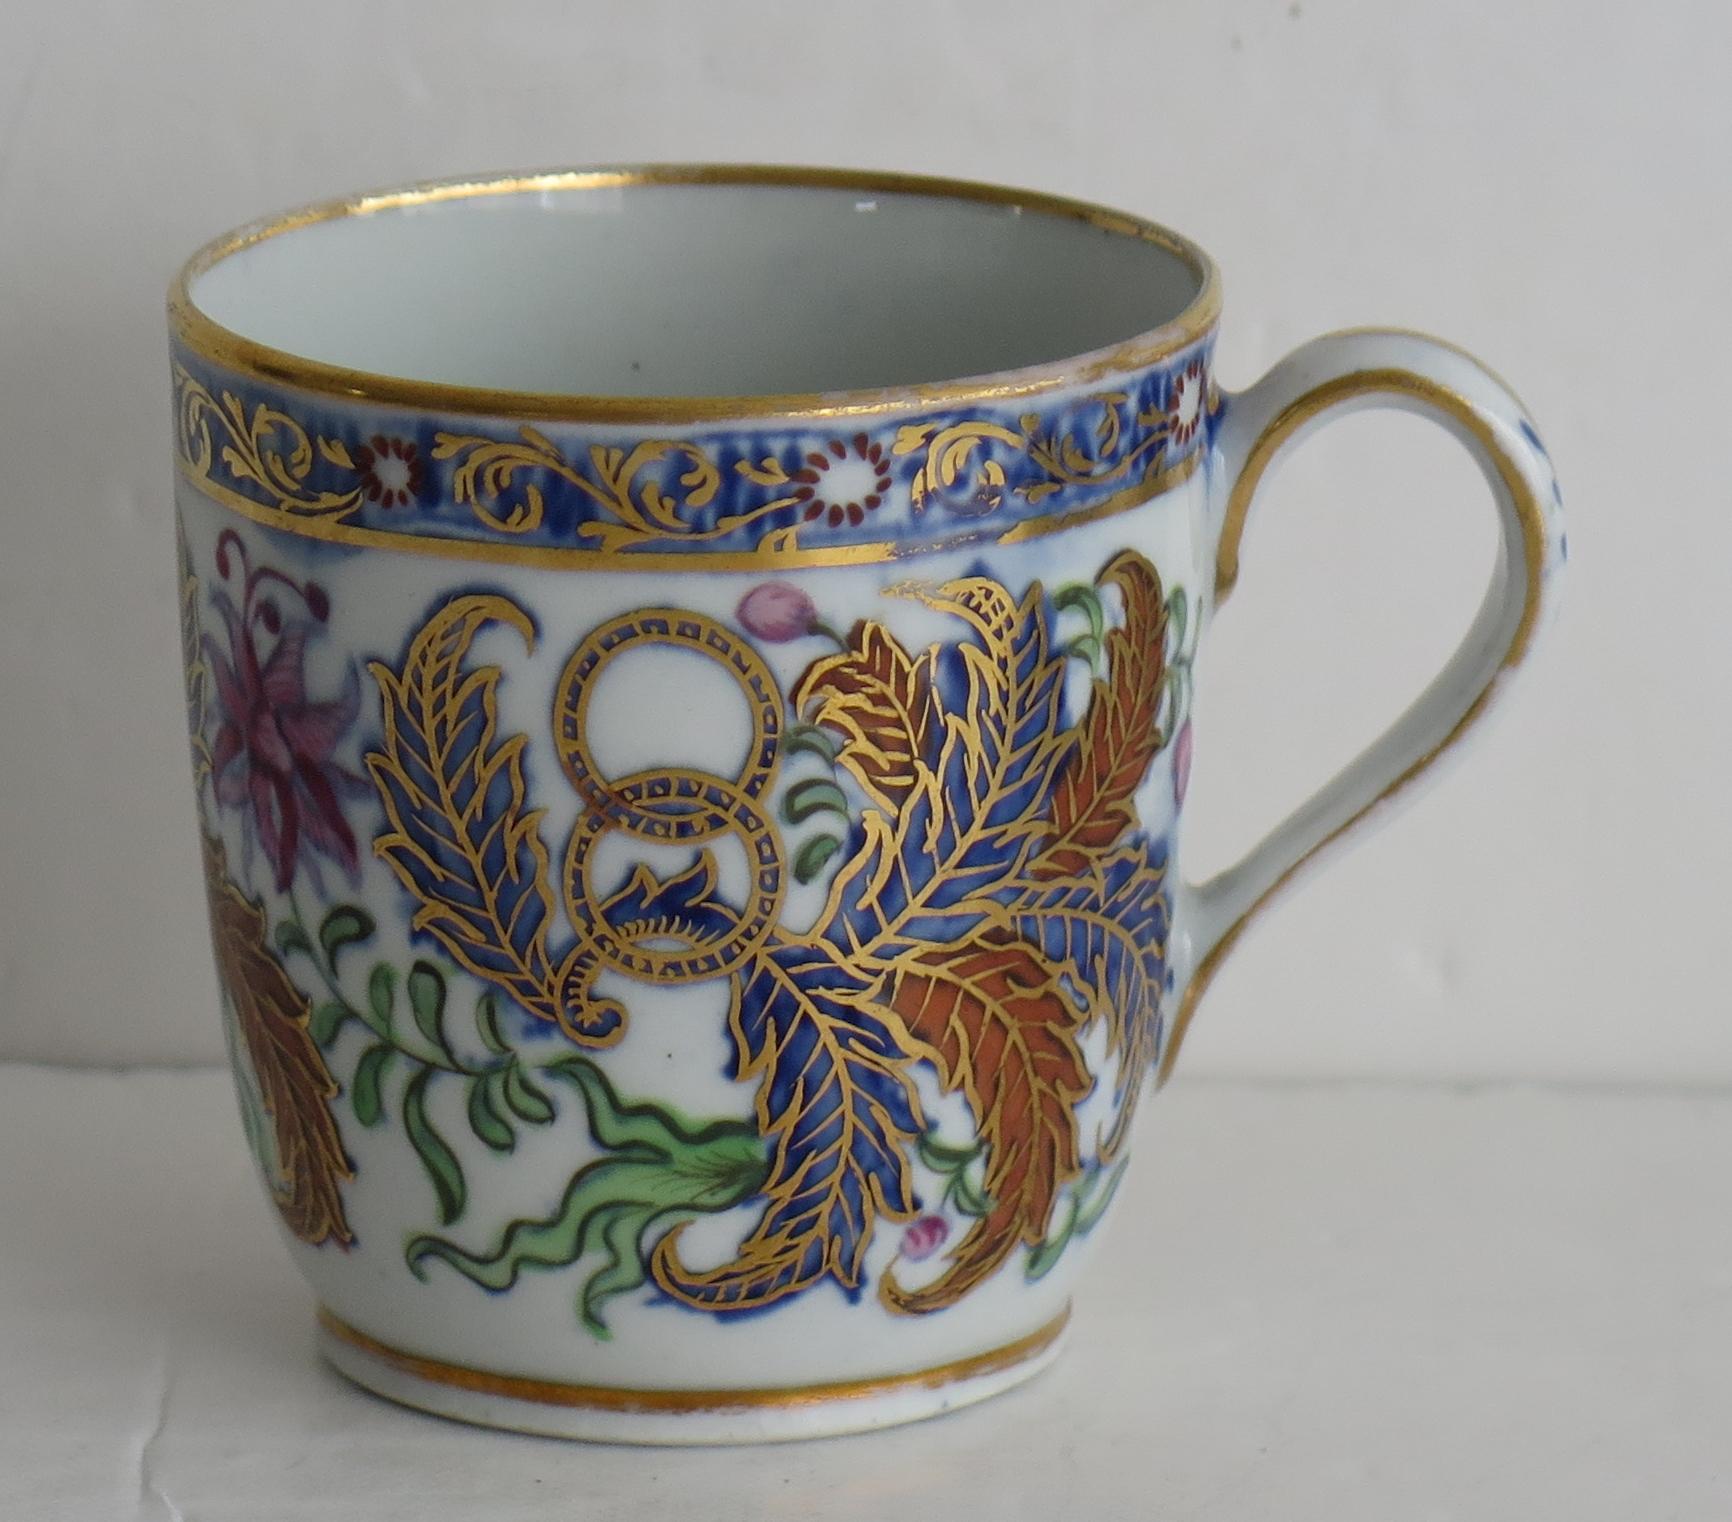 English 18th Century Newhall Porcelain Duo Coffee Cup and Saucer Pattern 274, Circa 1795